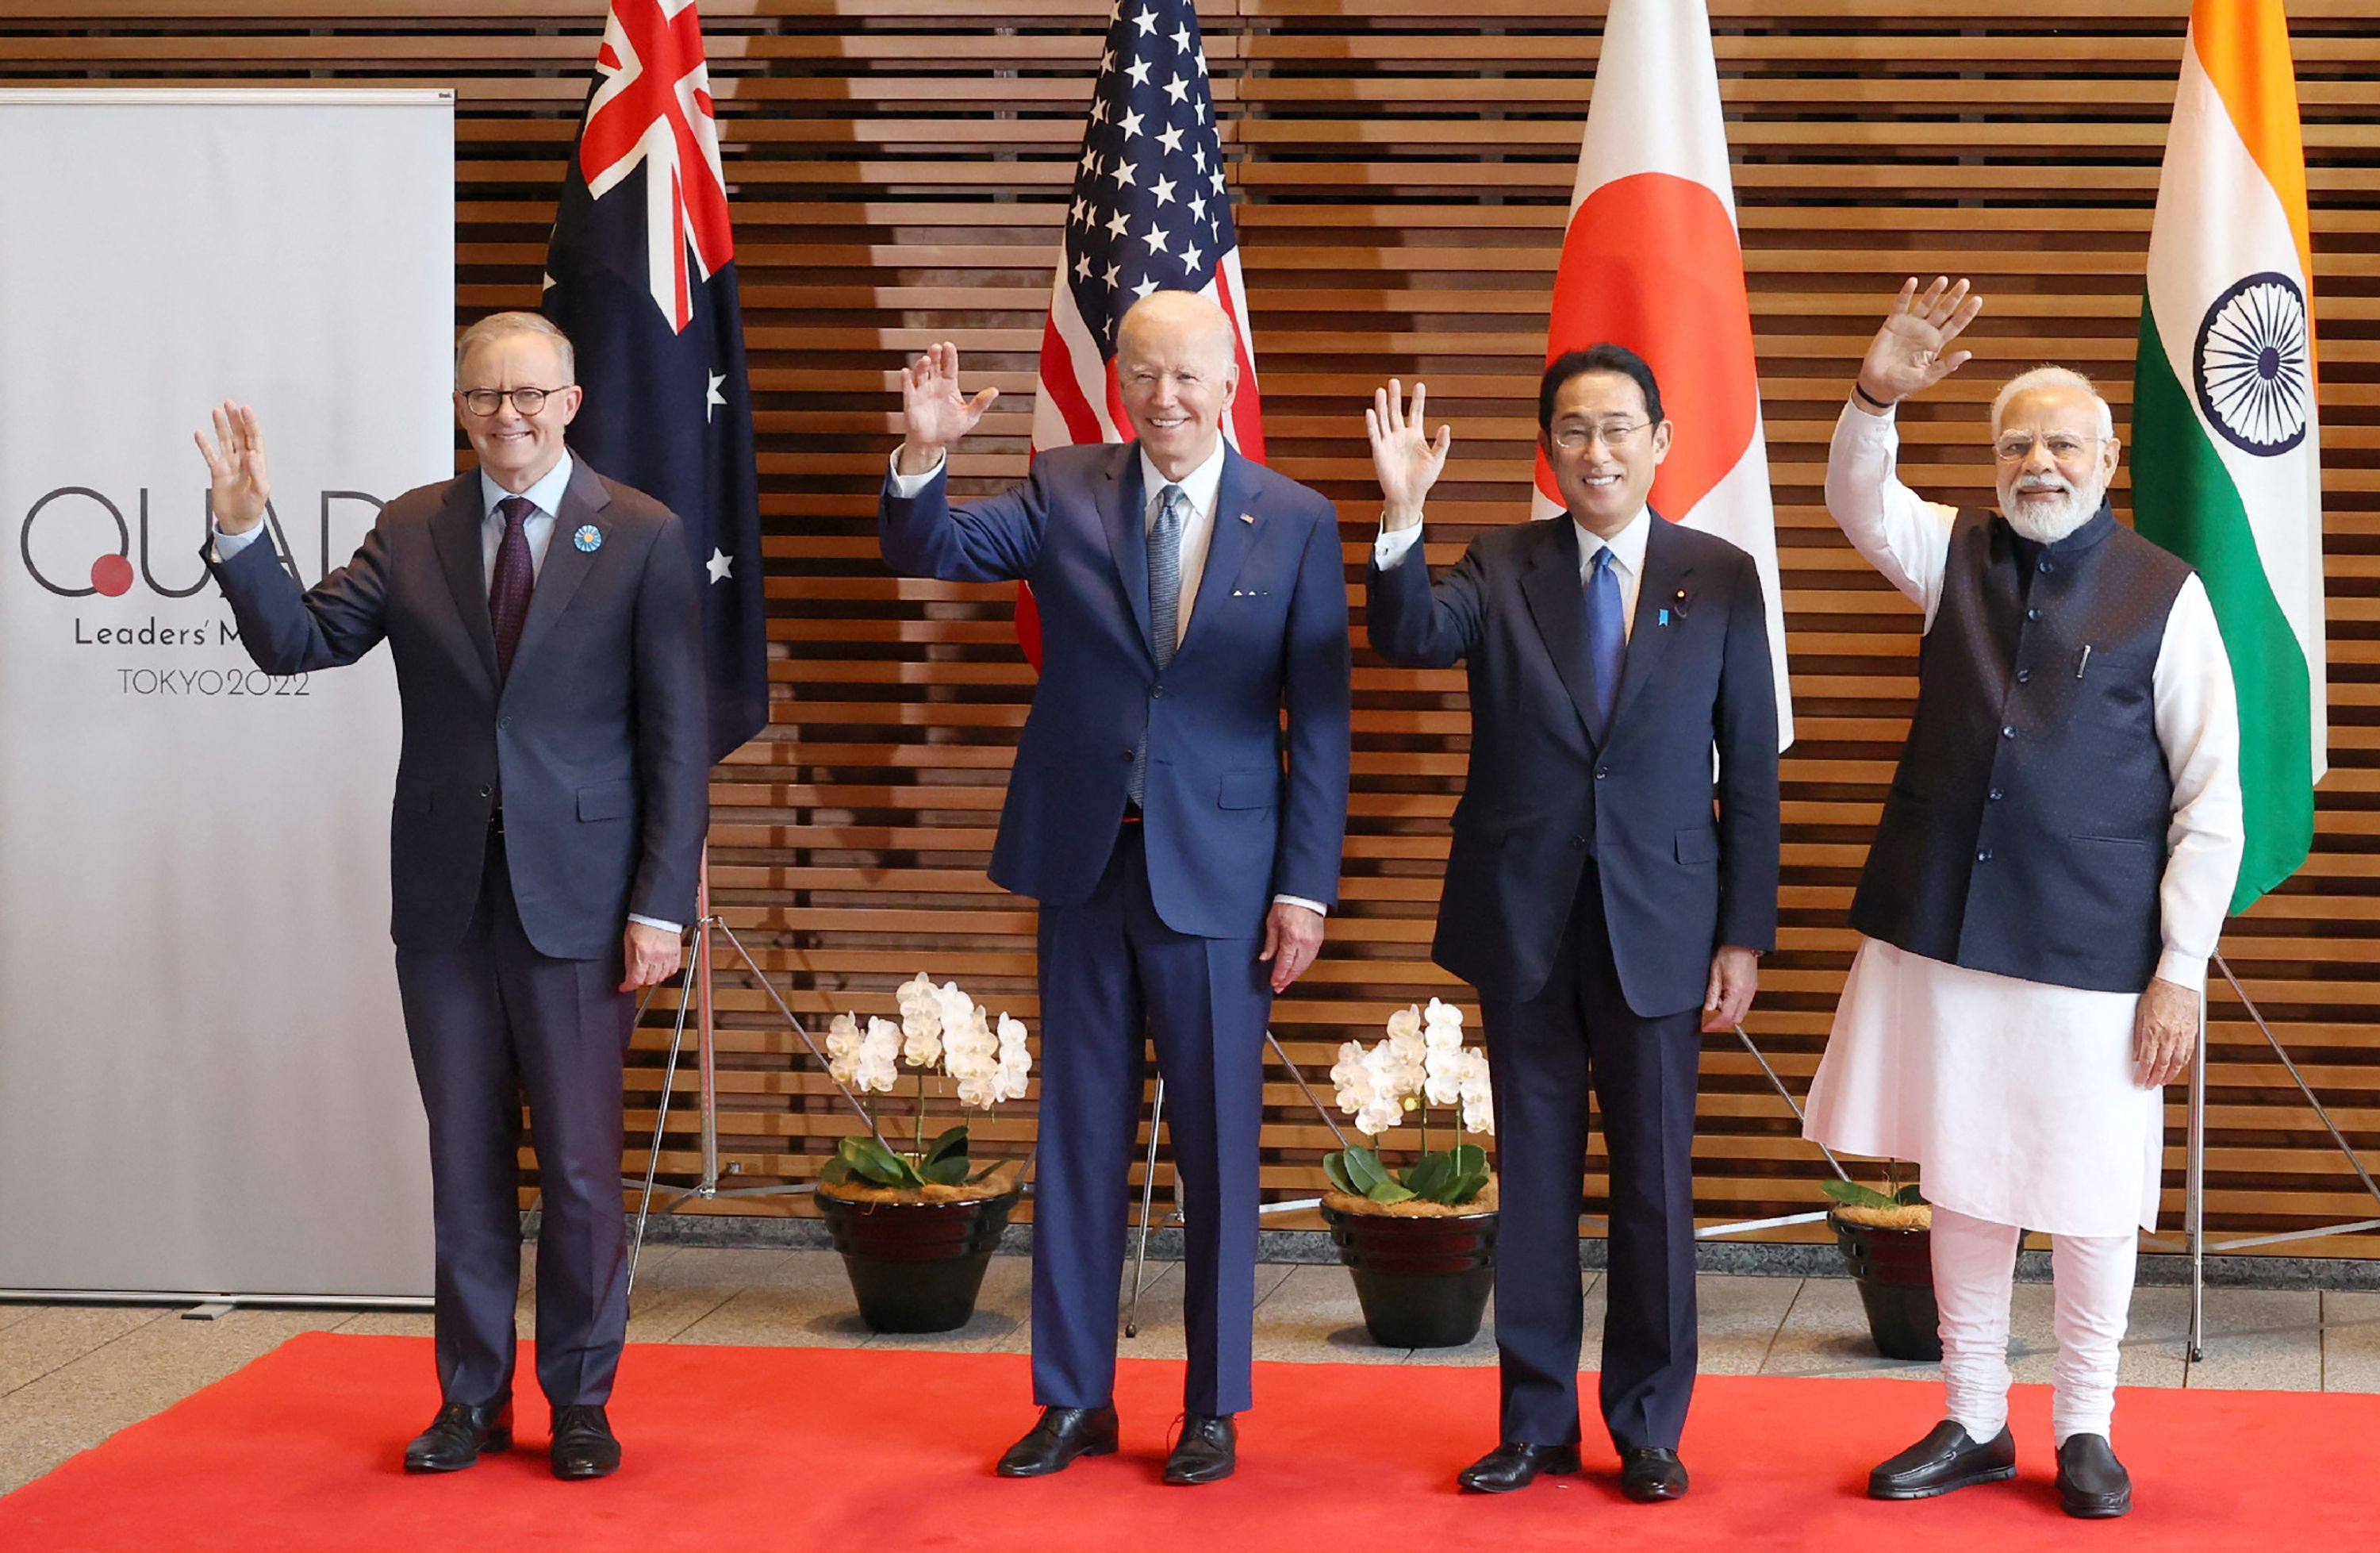 Australian Prime Minister Anthony Albanese, US President Joe Biden, Japanese Prime Minister Fumio Kishida, and Indian Prime Minister Narendra Modi wave before their Quad leaders’ meeting in Tokyo in May 2022. Photo: AFP